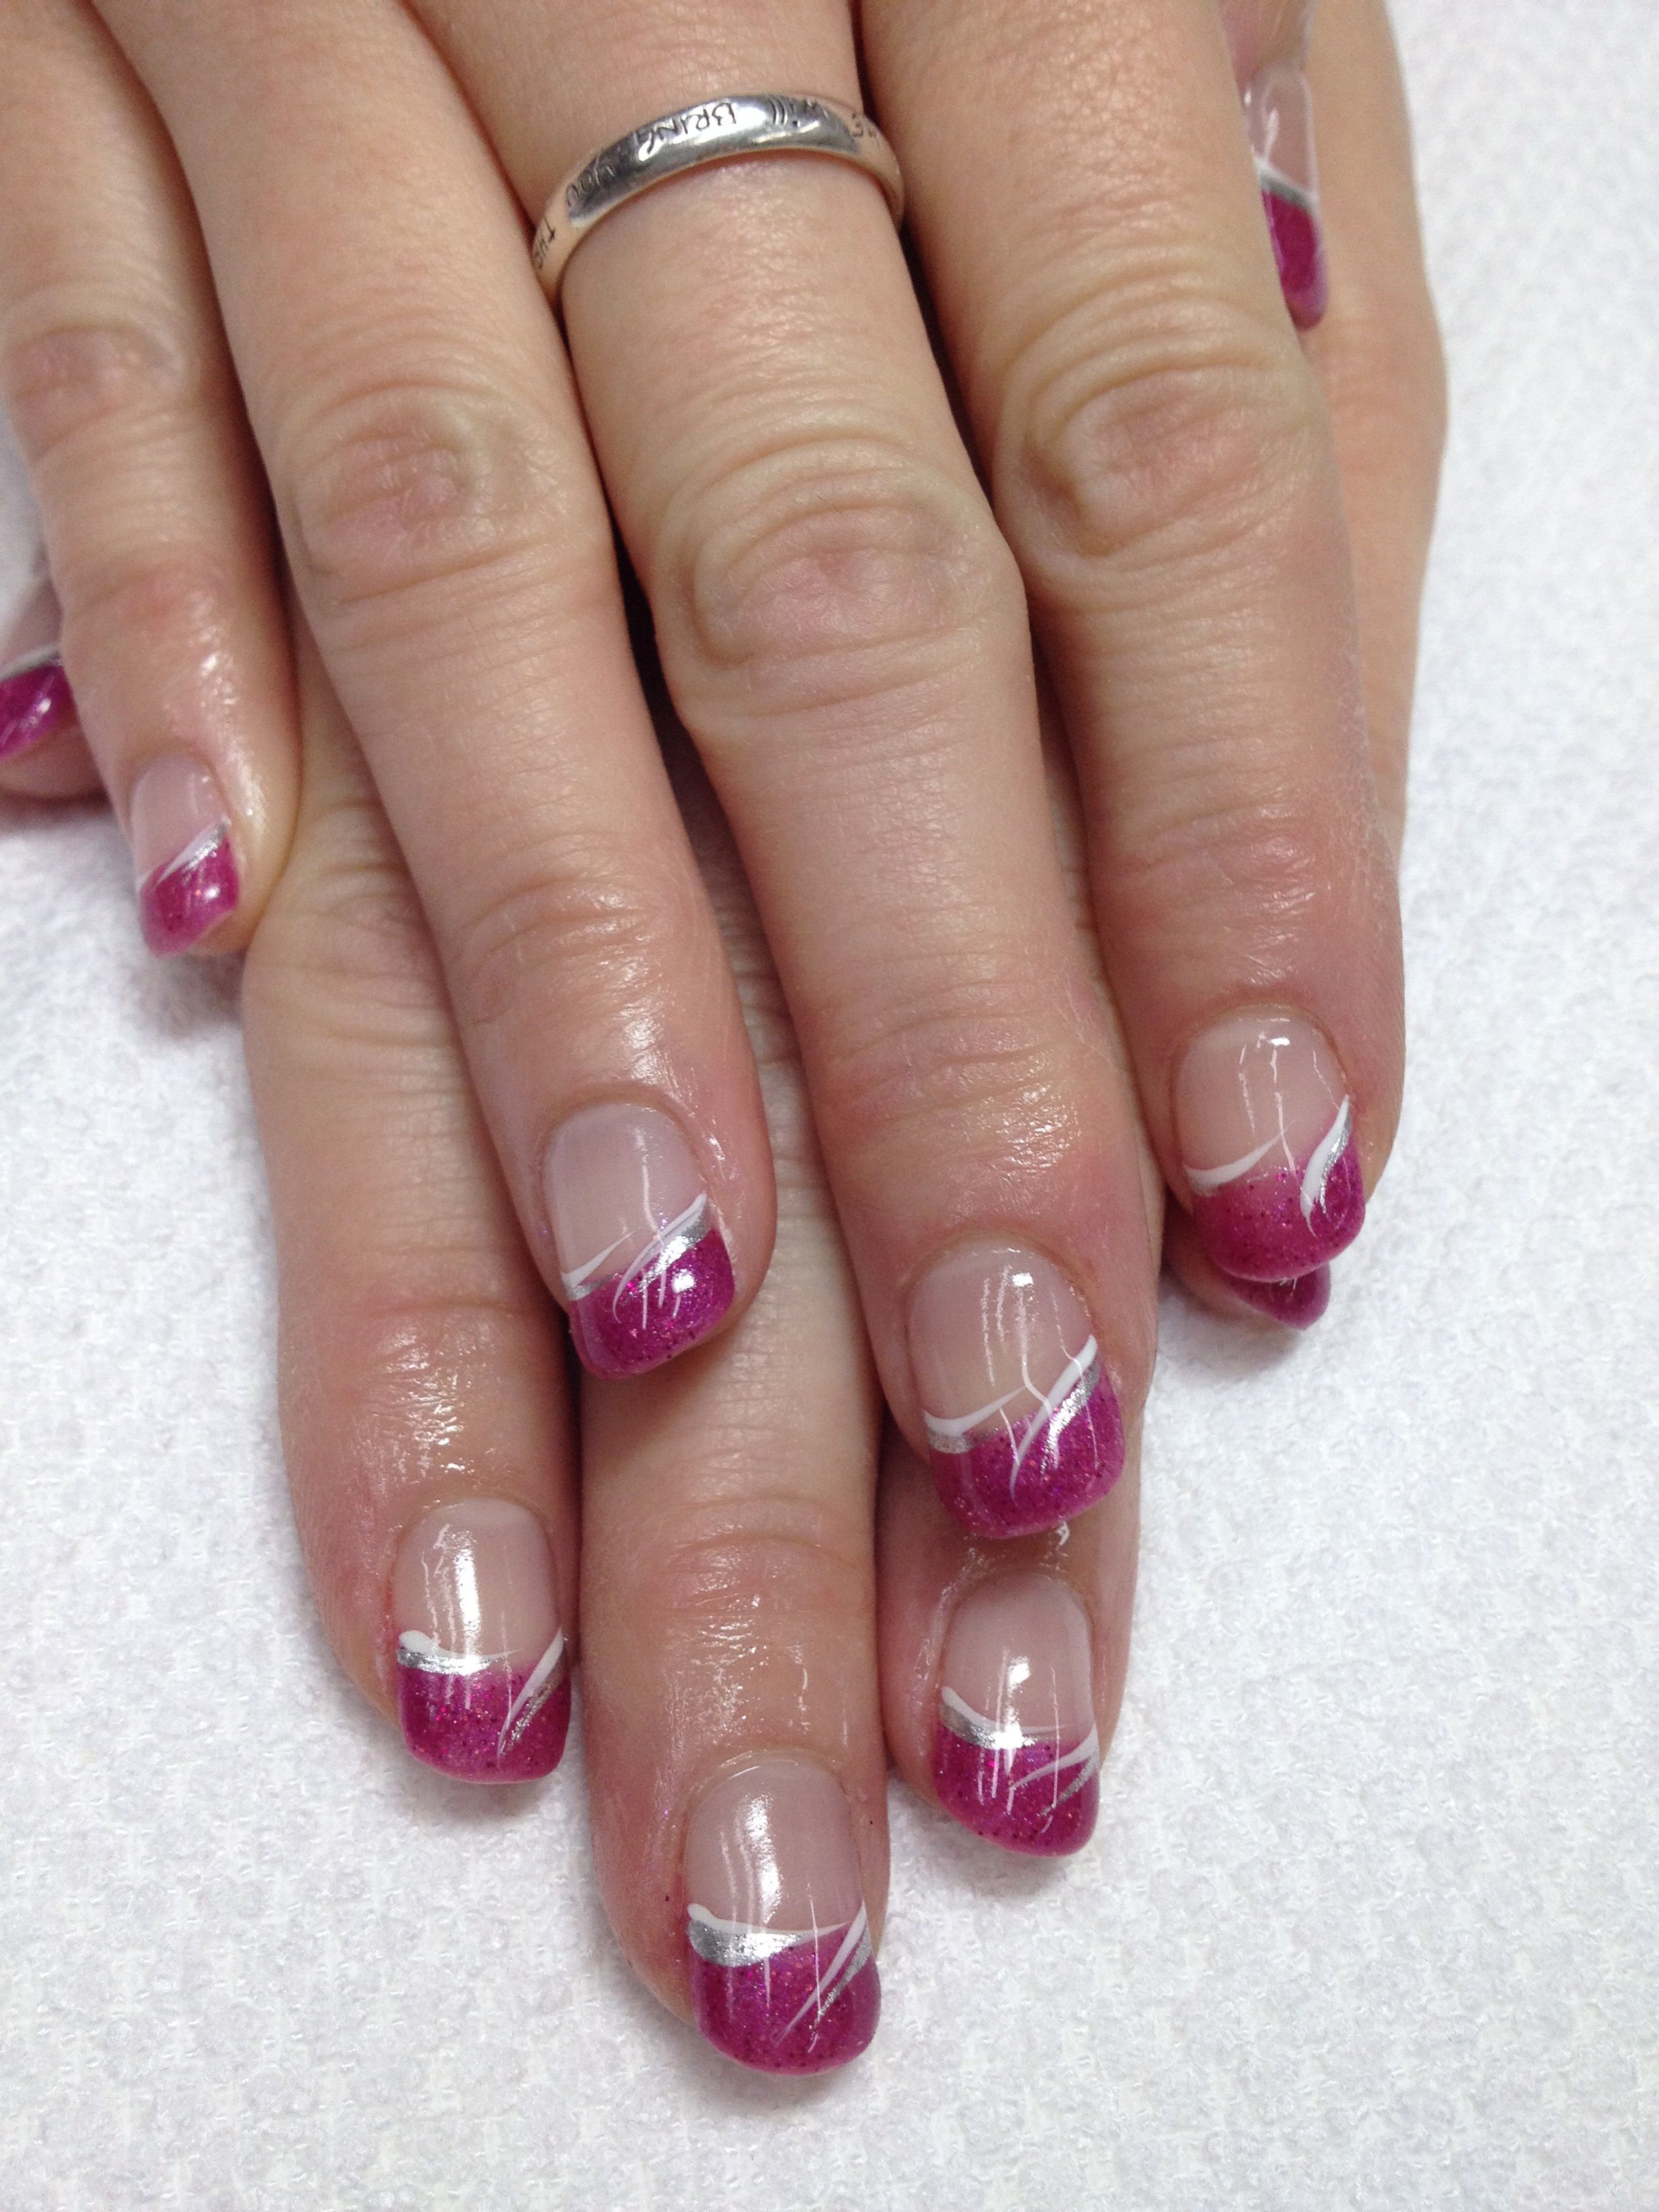 Love These Fun Pink French Gel Nails And Swished Accents Ties The Whole Look Together Of Cours French Manicure Nail Designs Manicure Nail Designs Gel Nails